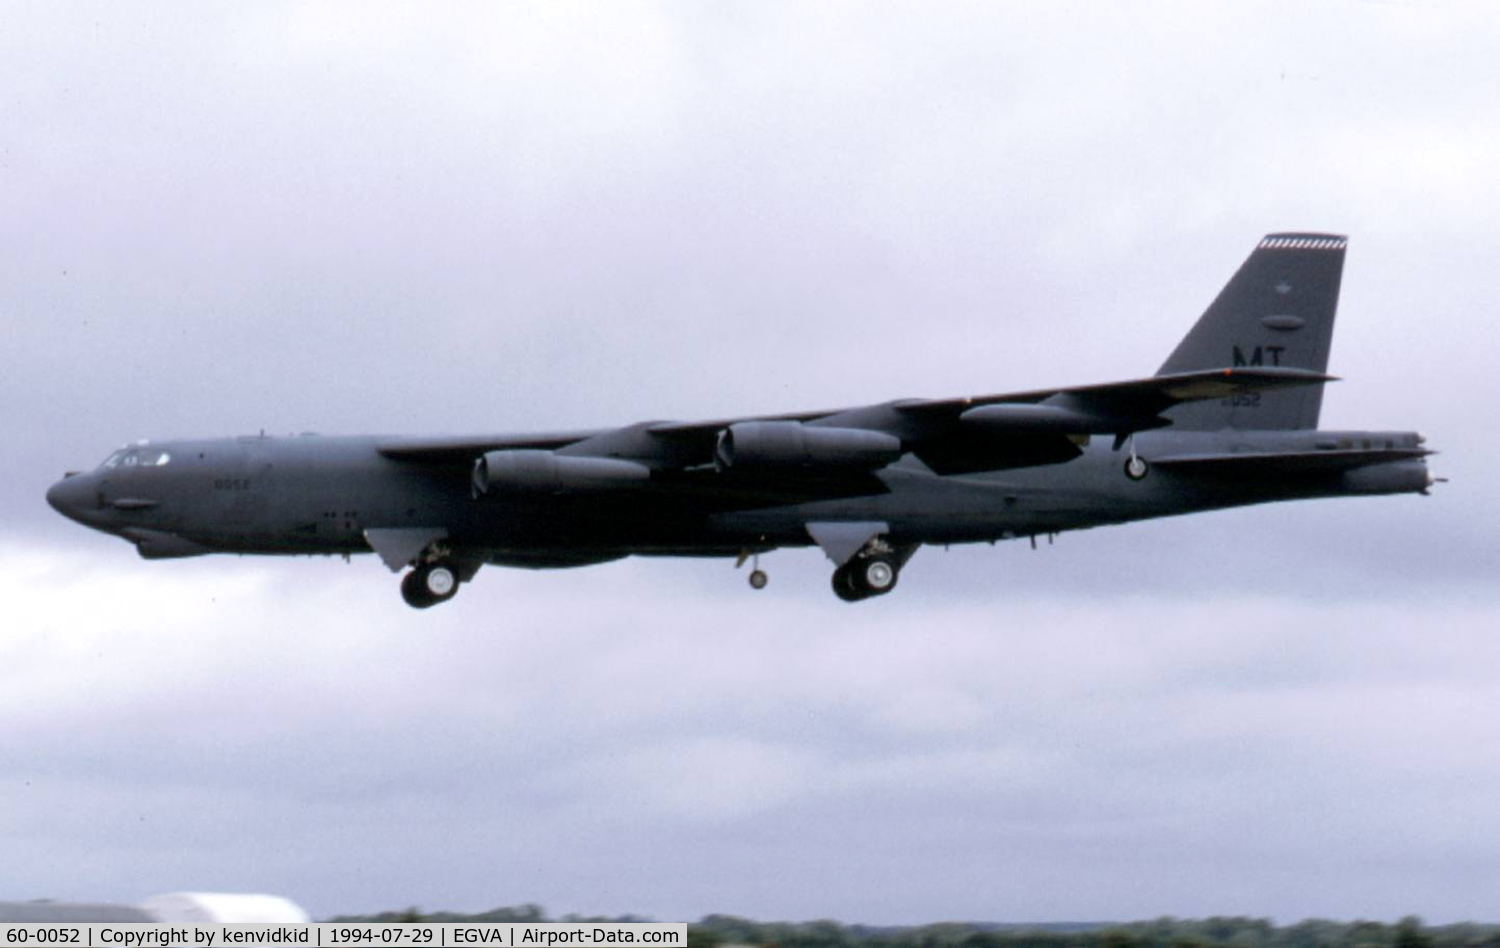 60-0052, 1960 Boeing B-52H Stratofortress C/N 464417, US Air Force arriving for RIAT.